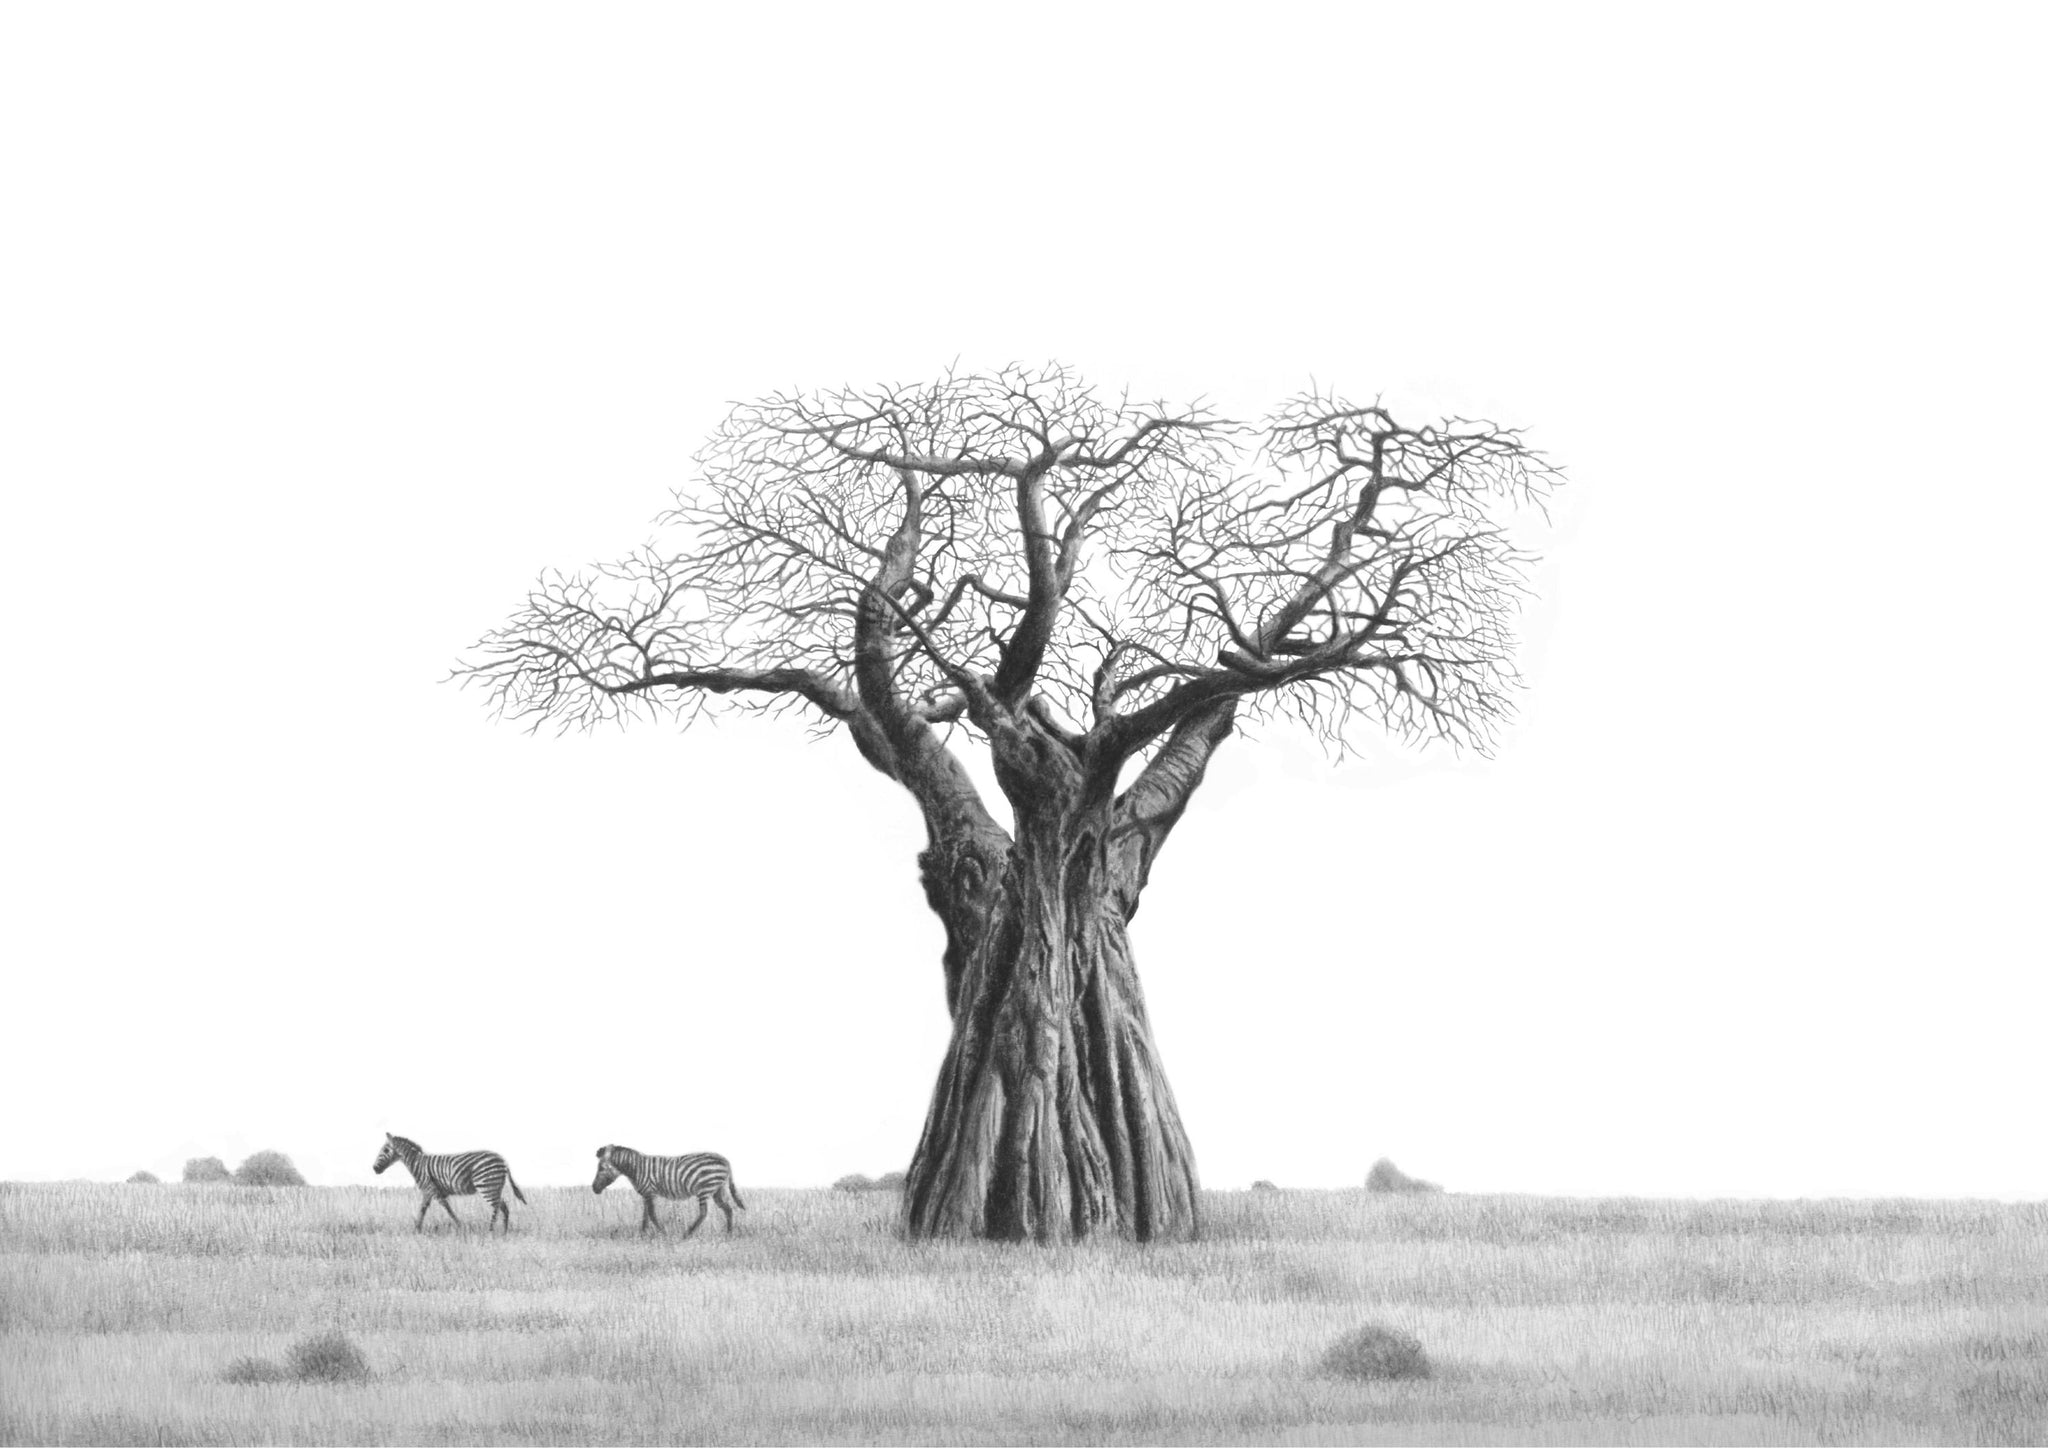 African Baobab Tree and Zebras pencil drawing artwork by South African wildlife artist Matthew Bell